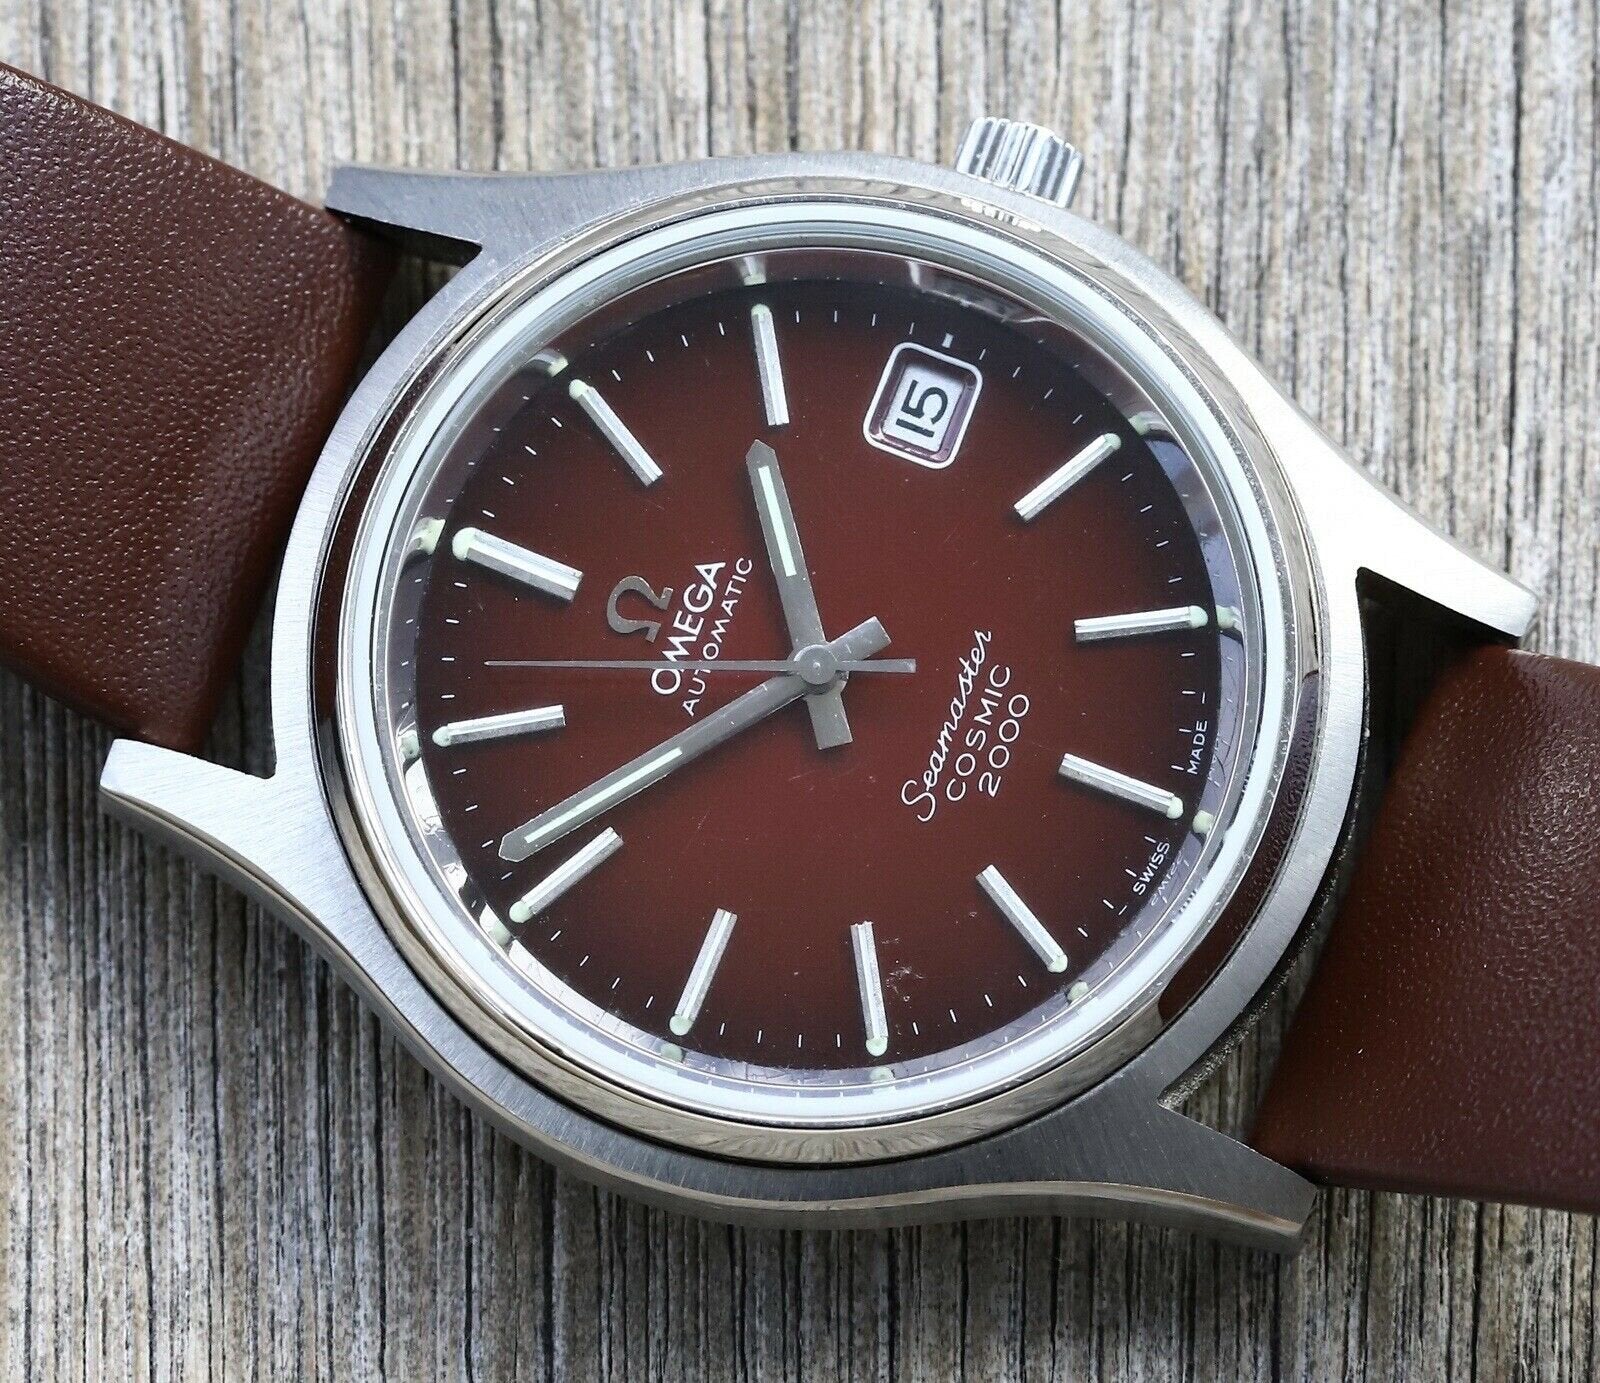 Omega_Seamaster_Cosmic_2000_Burgundy_Lacquer_Dial_-_1973_Watch_Vault_02.jpg